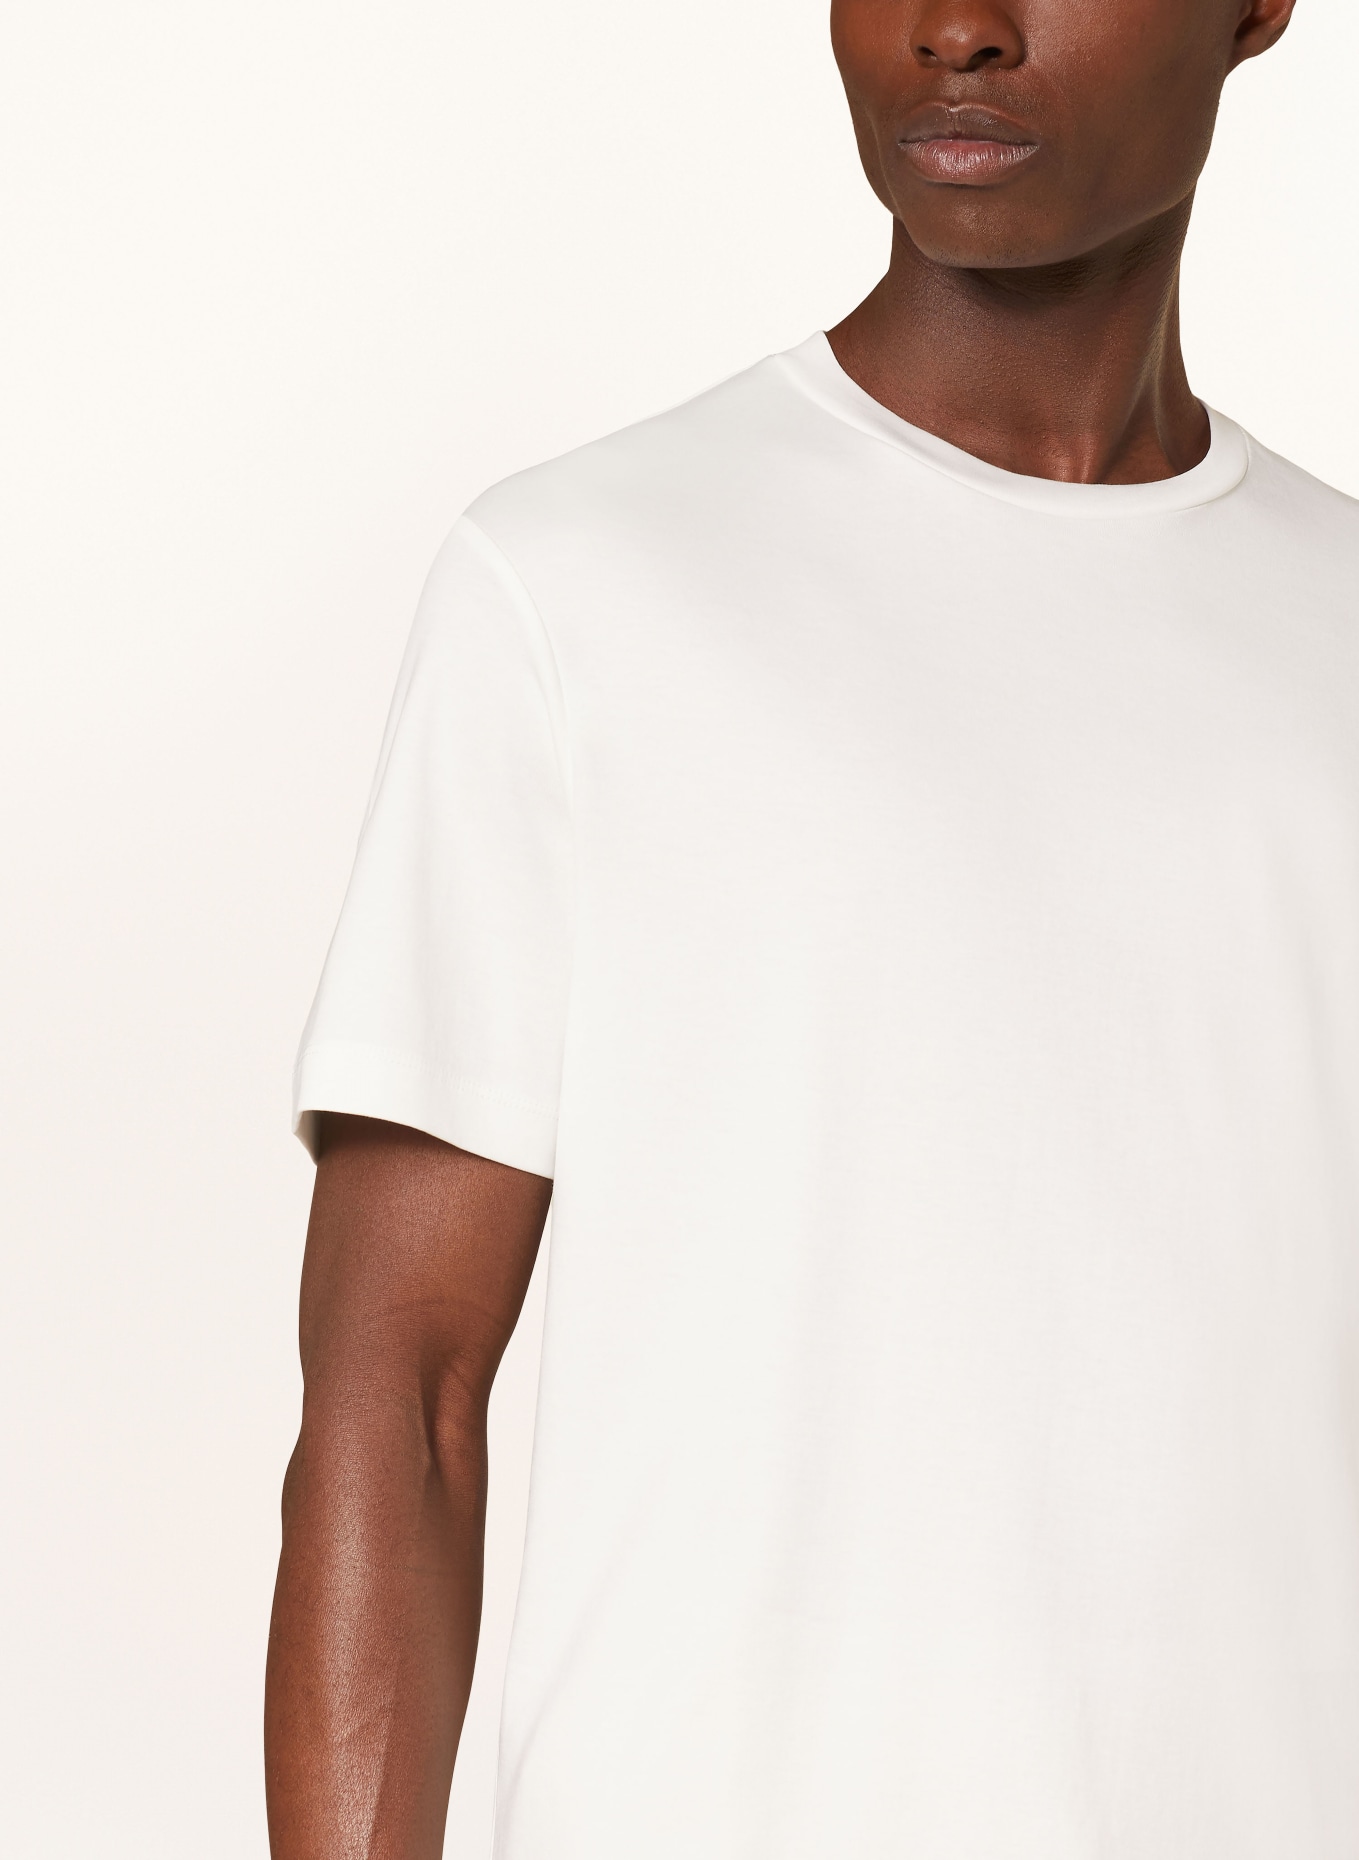 CG - CLUB of GENTS T-shirt, Color: WHITE (Image 4)